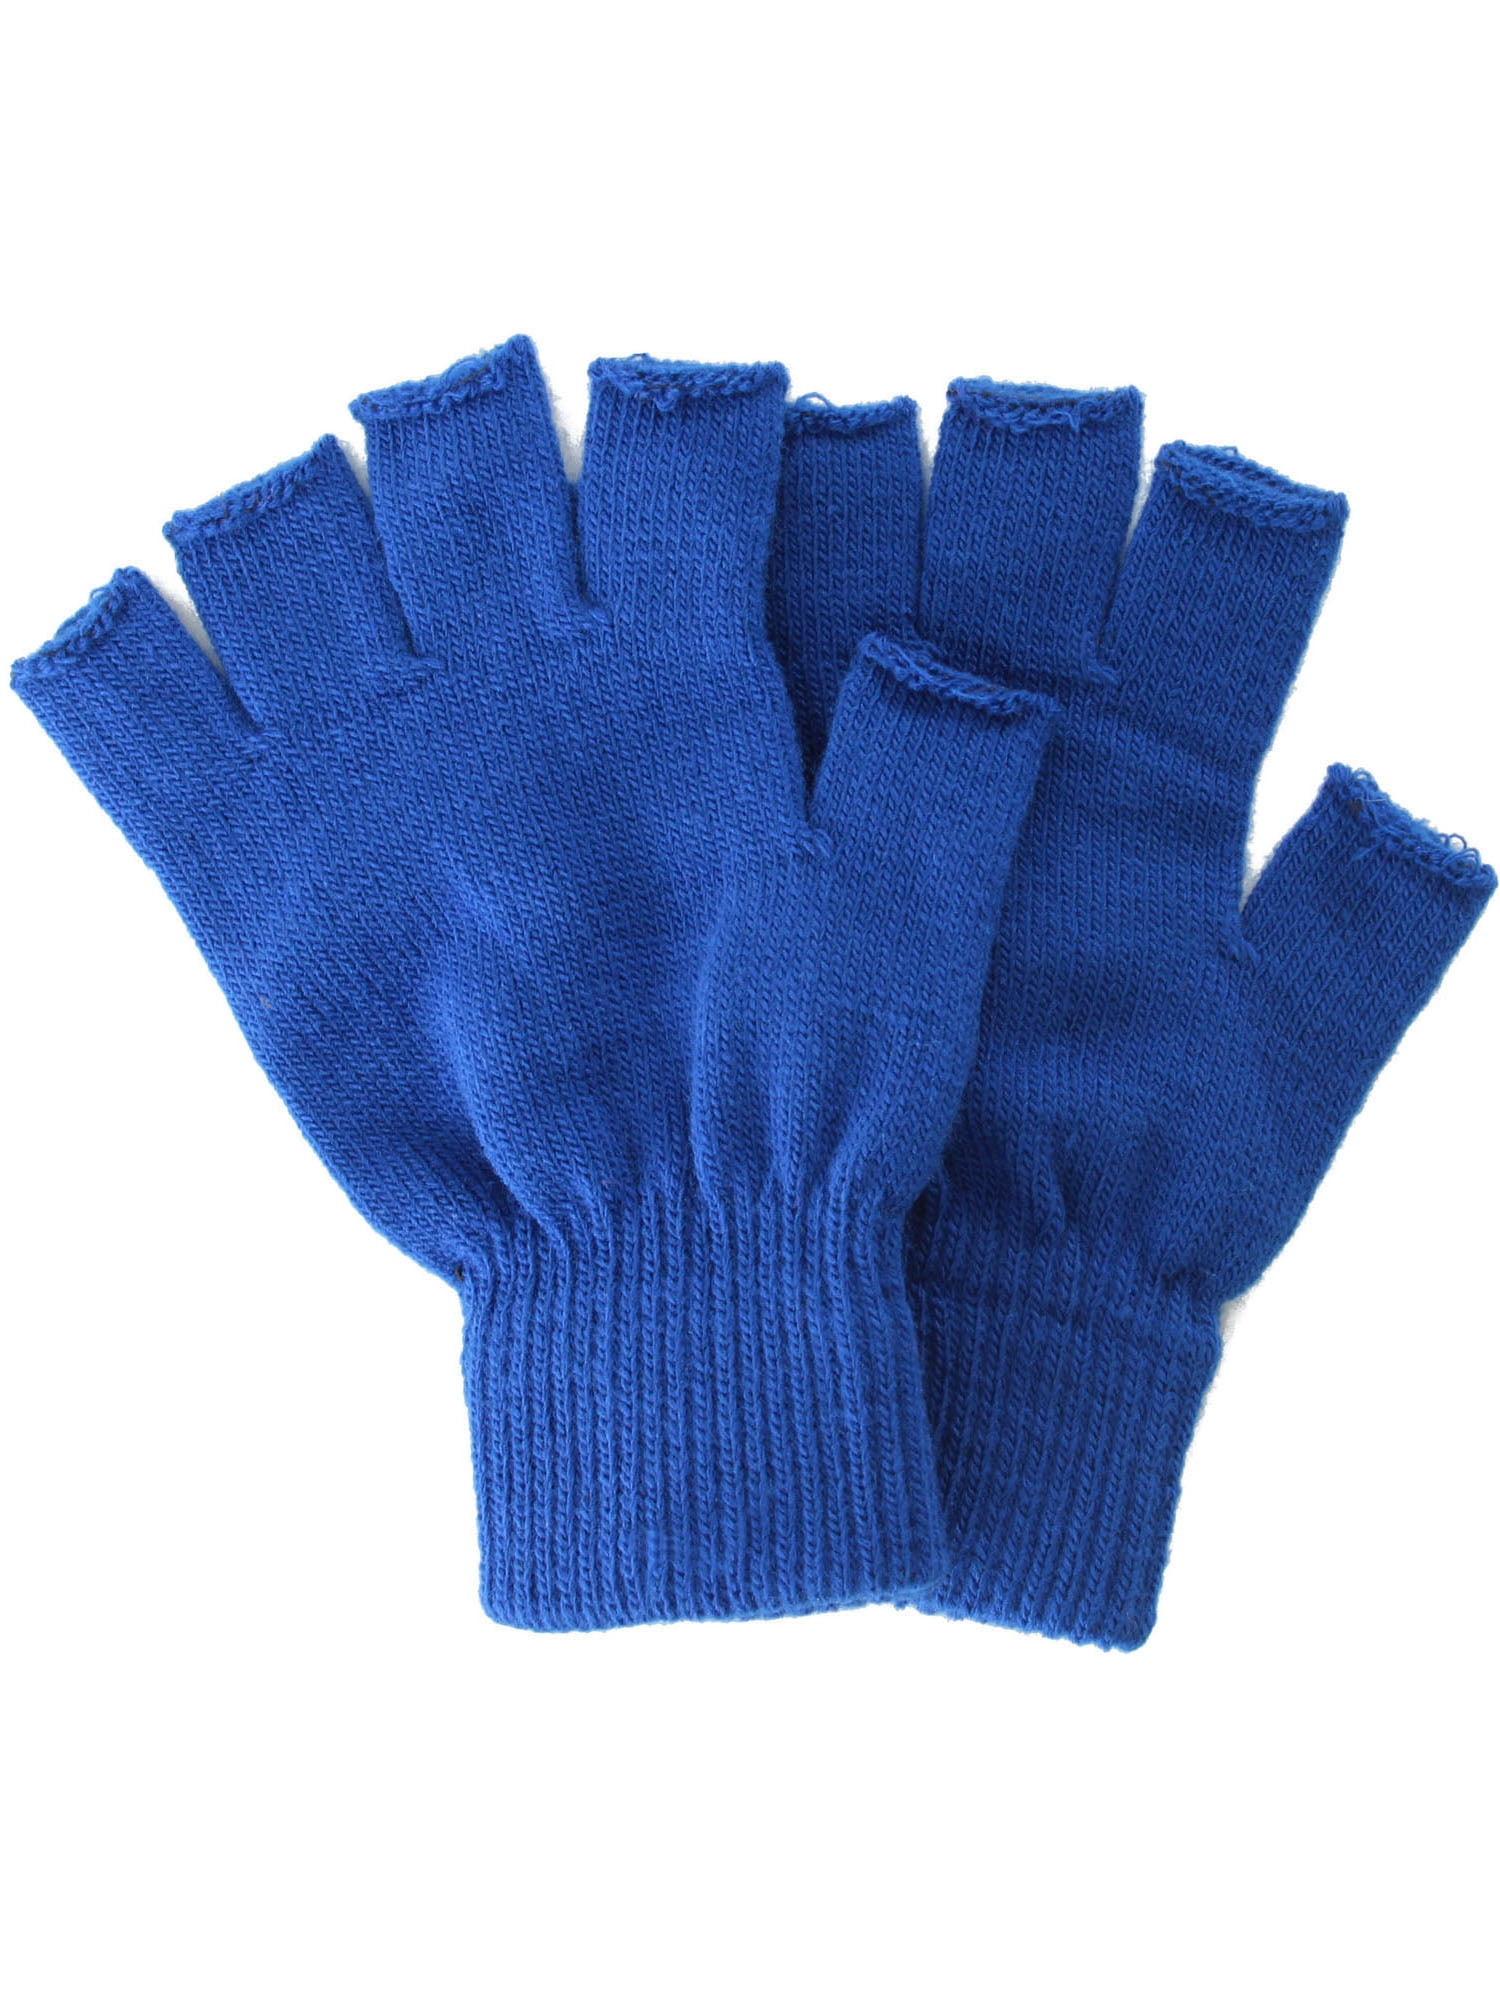 Men's ROYAL Thermal Thinsulate Knitted Fleece Lined Warm Fingerless Gloves 